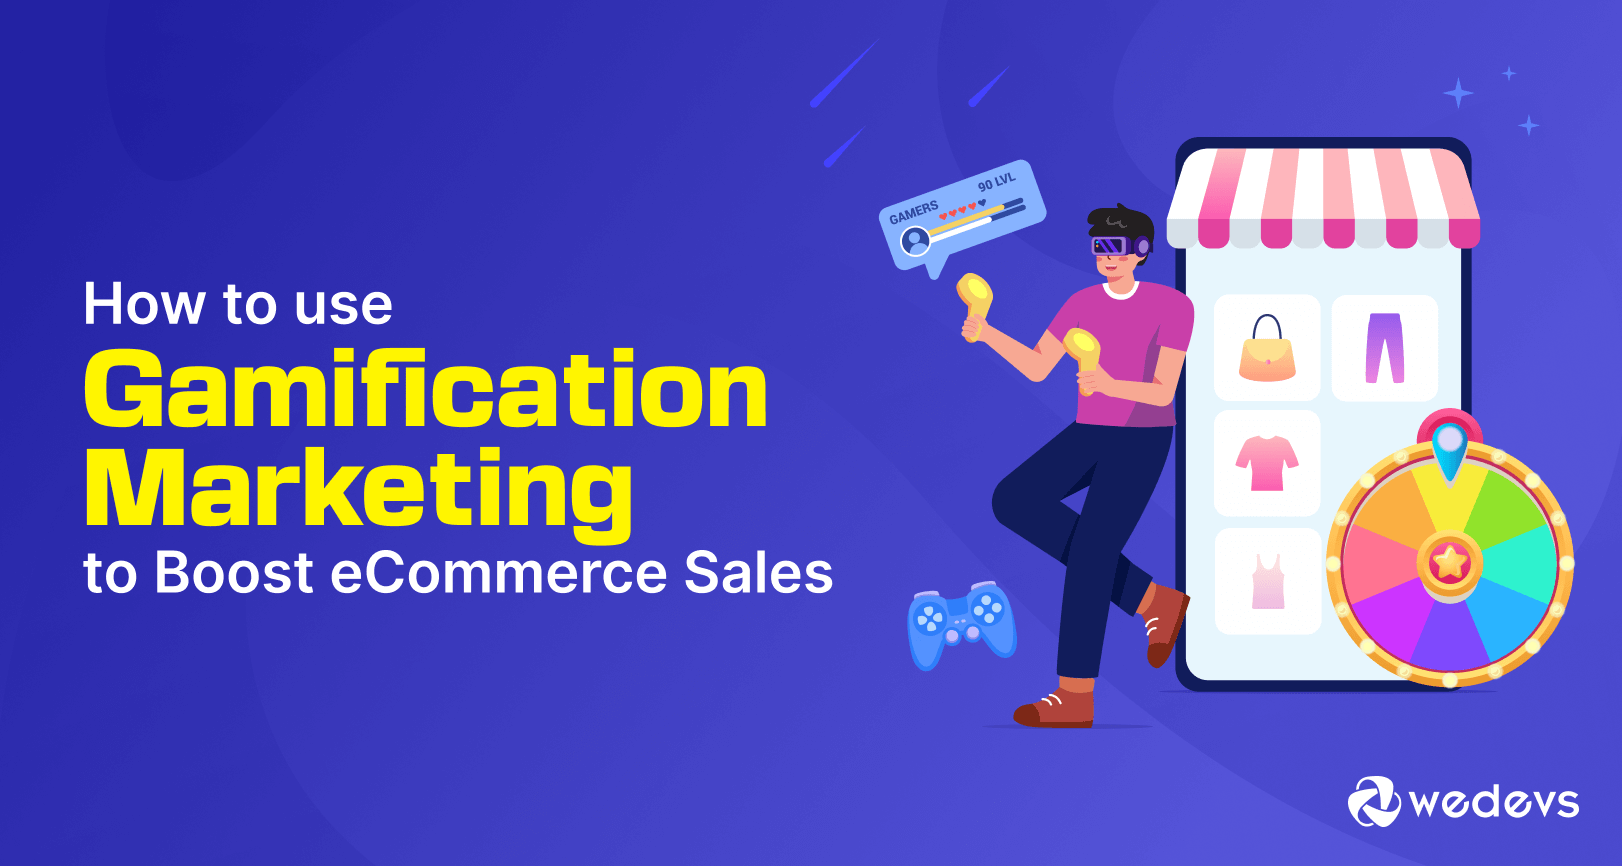 How to Use Gamification Marketing to Boost Your eCommerce Sales